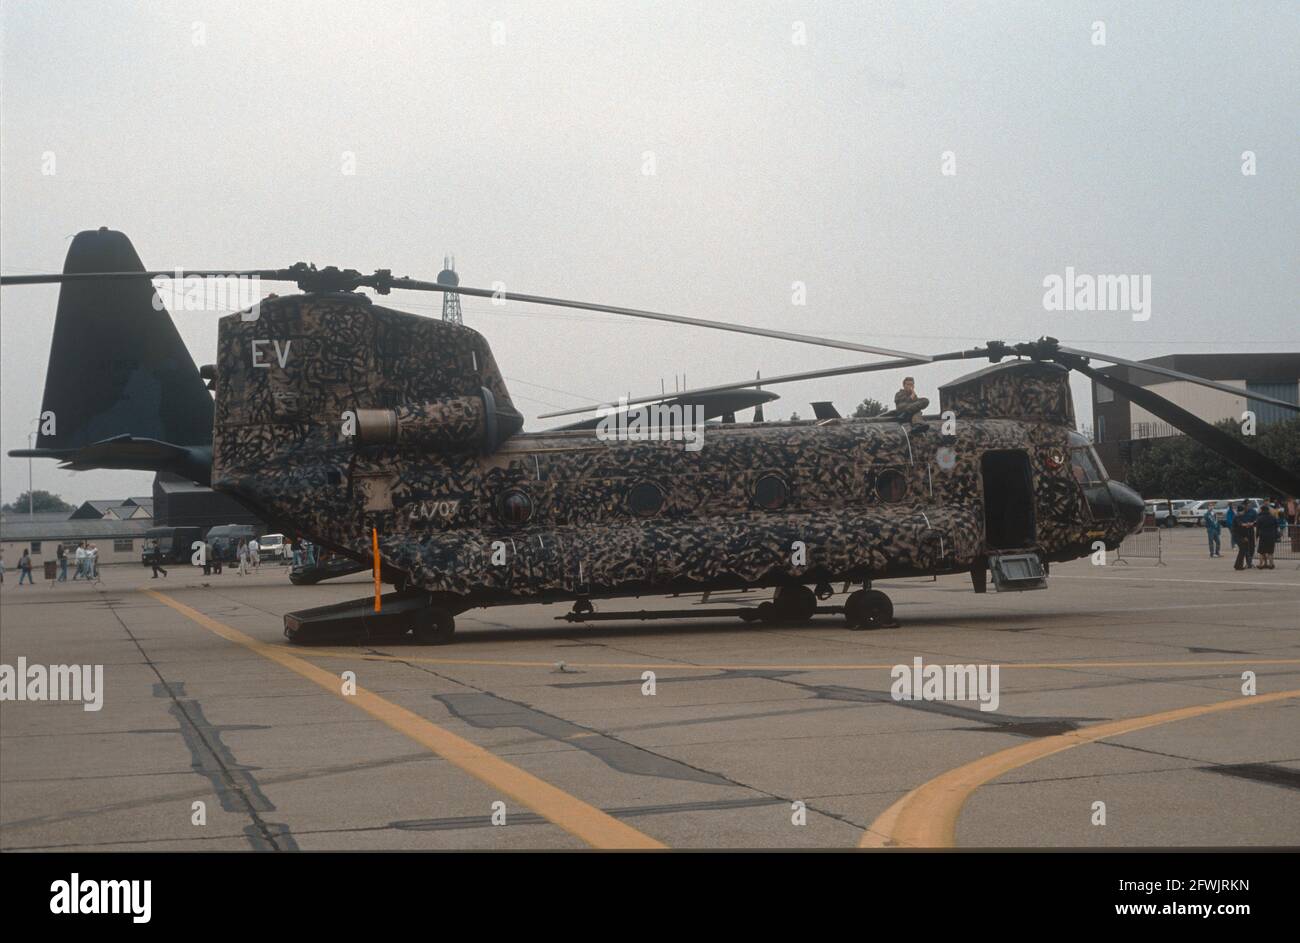 An RAF CH-47C Chinook in Desert Storm camouflage on static display at the 1991 Mildenhall Air Fete. Stock Photo